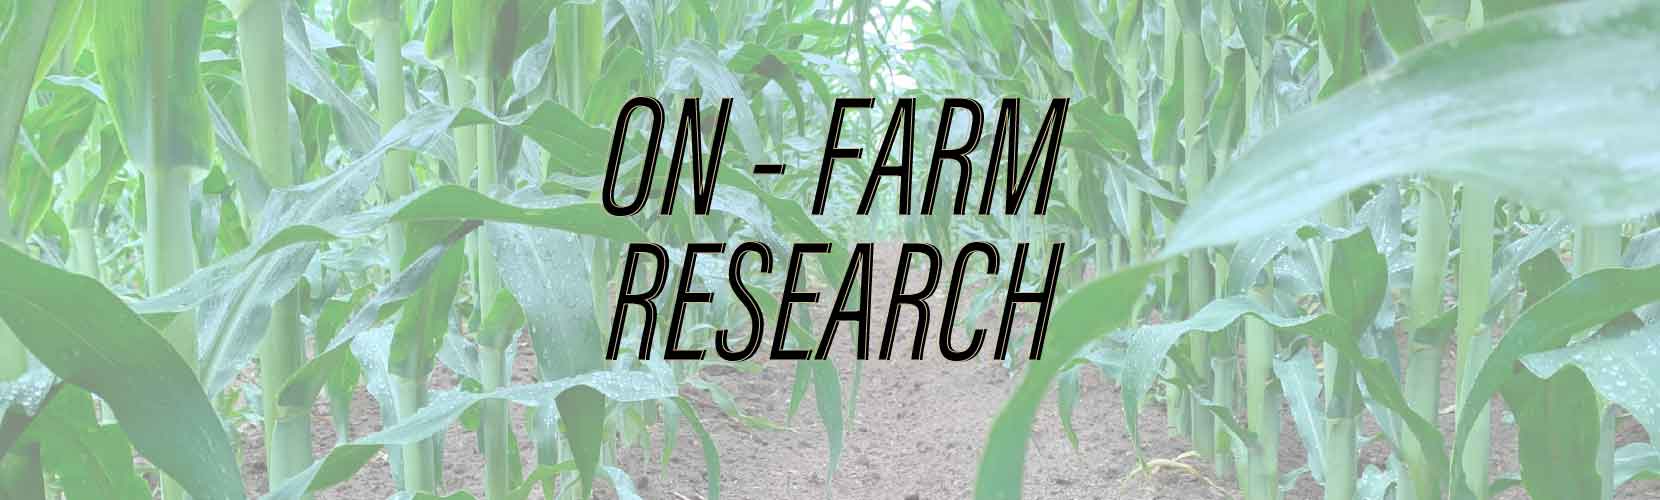 on-farm research discussion